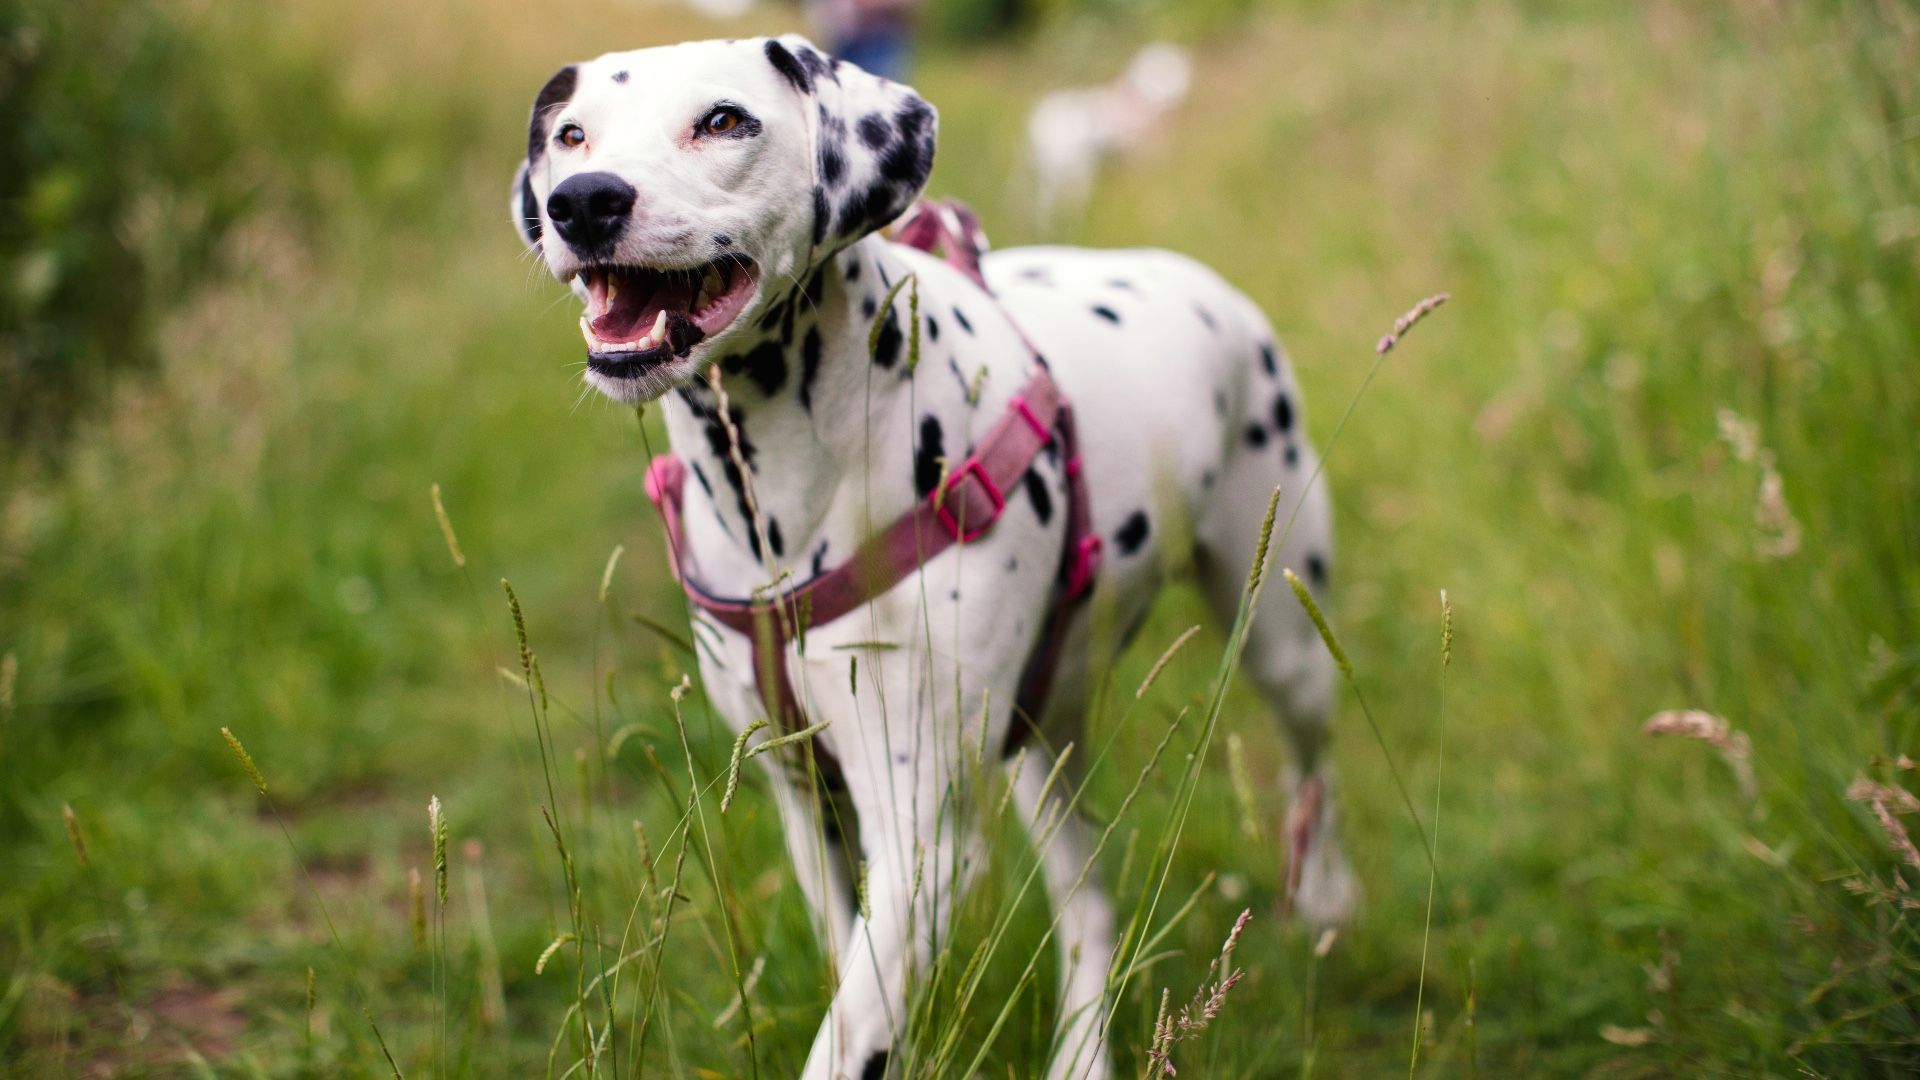 <p>                     5%-8% of Dalmatians are born deaf in both ears, while somewhere between 15%-30% are born with deafness in one ear. Oddly, they are usually born with normal hearing but develop deafness within a few weeks due to a genetic issue that is tied to their beautiful spotty coats, according to the <a href="https://www.ufaw.org.uk/dogs/dalmatian-deafness" rel="nofollow">Universities Federation for Animal Welfare.</a>                    </p>